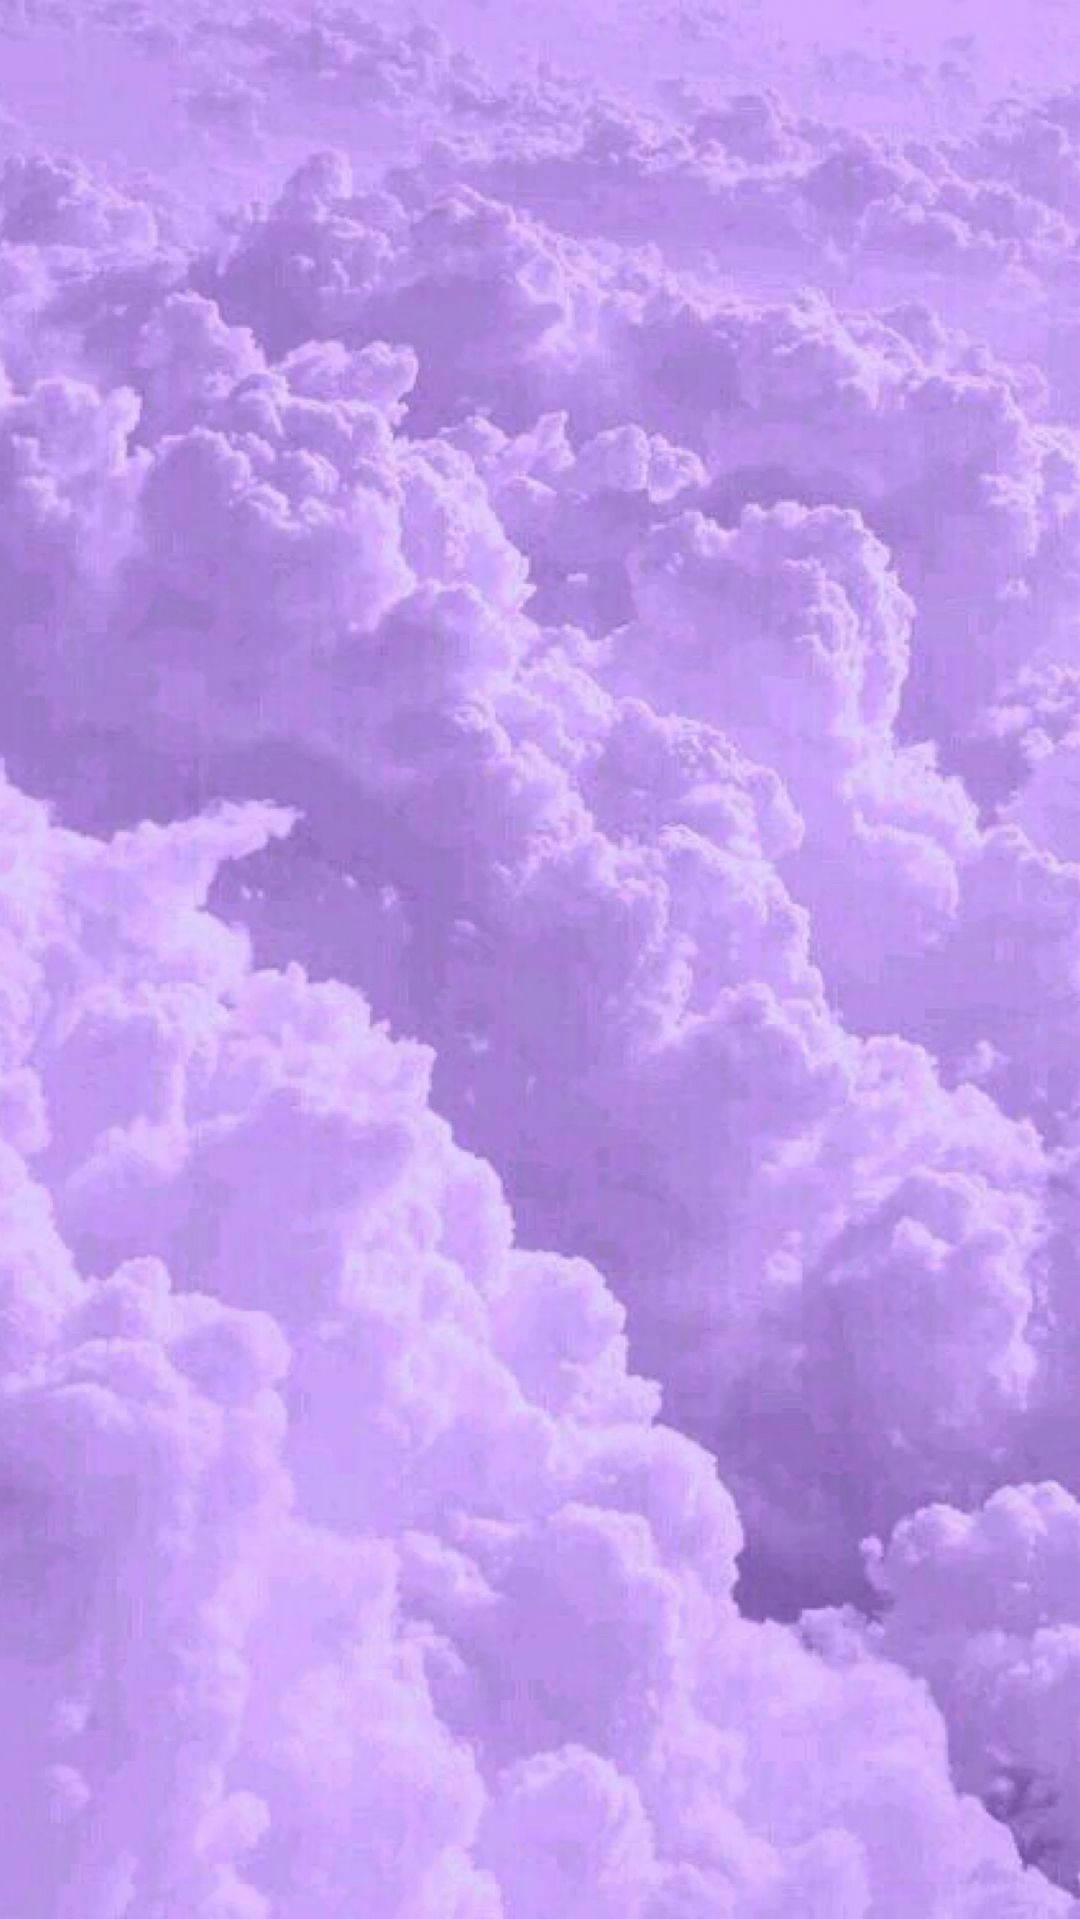 Download Aesthetic Lavender Clouds Wallpaper